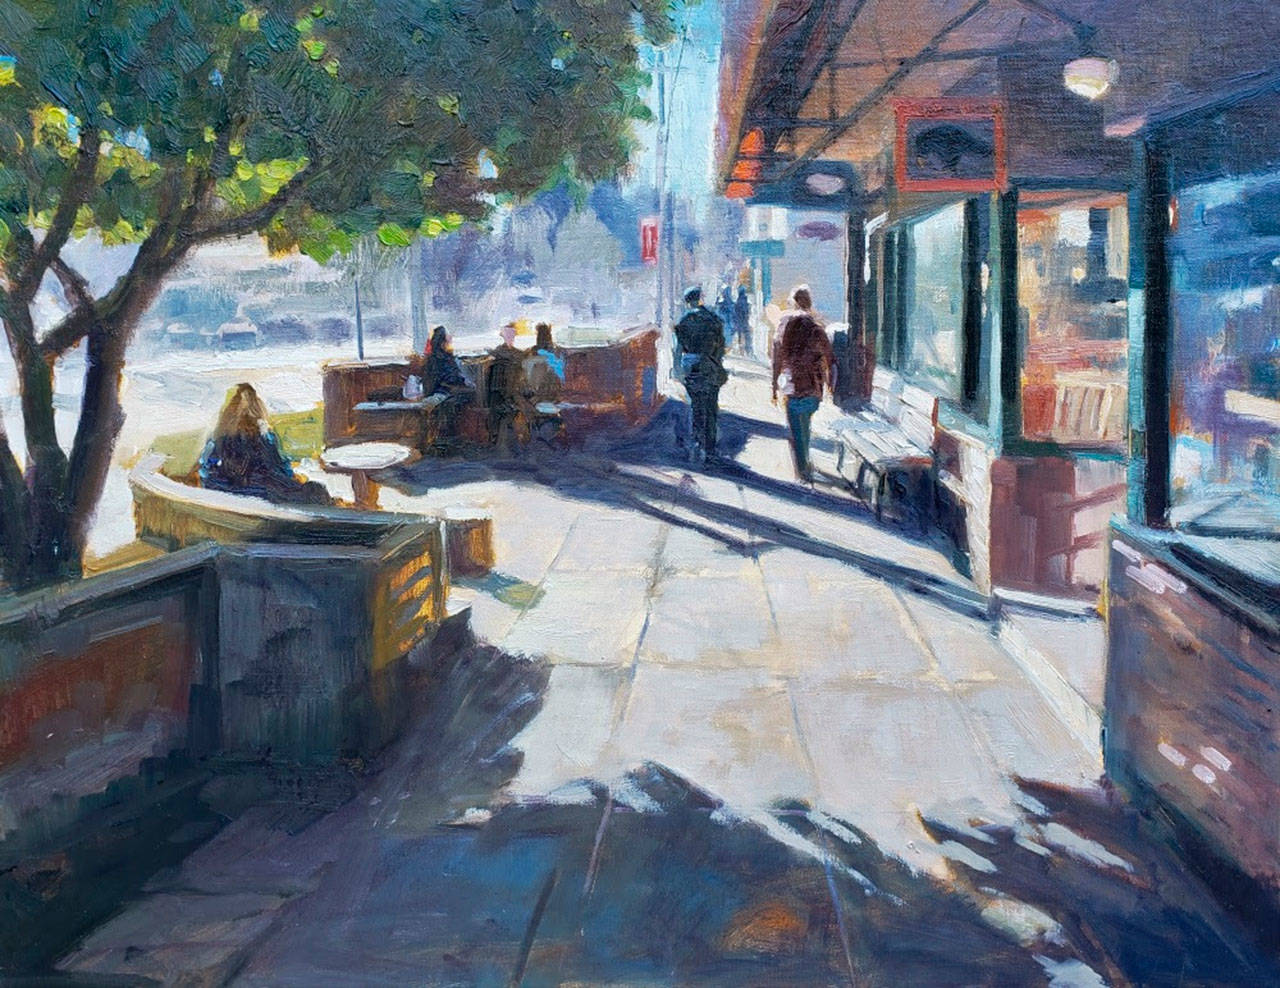 Image courtesy of Roby King Gallery | “Breakfast at the Blackbird” by Robin Weiss, on display at the Roby King Gallery.